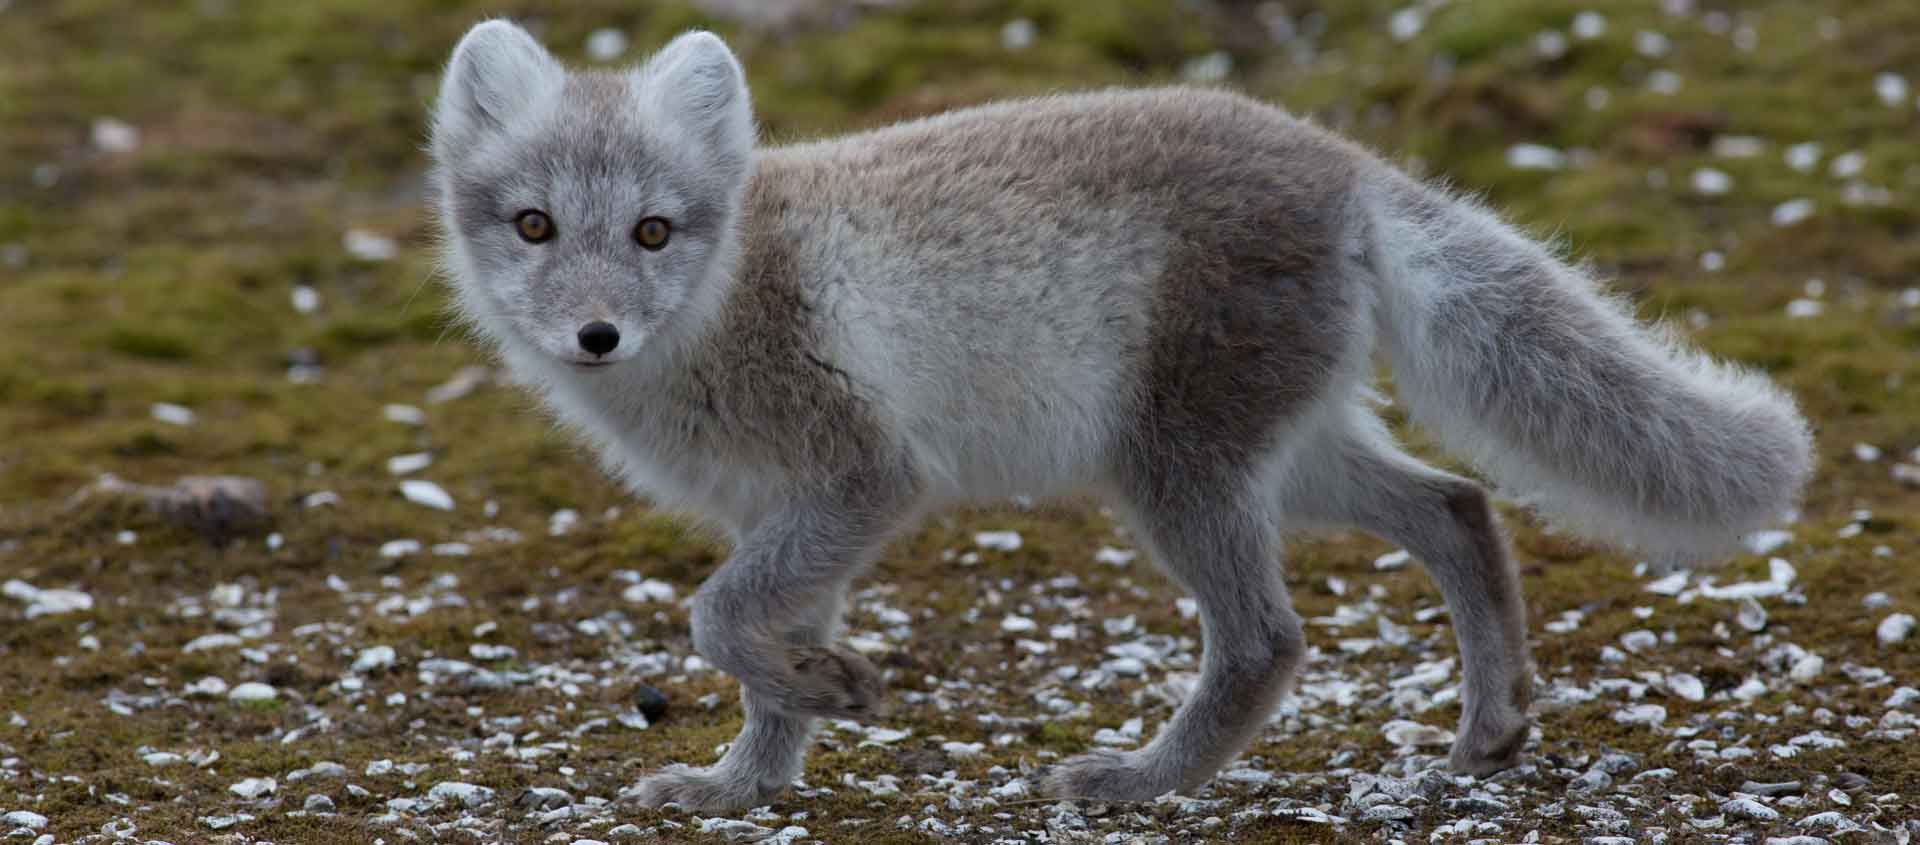 Baffin Island and Greenland image of Arctic Fox